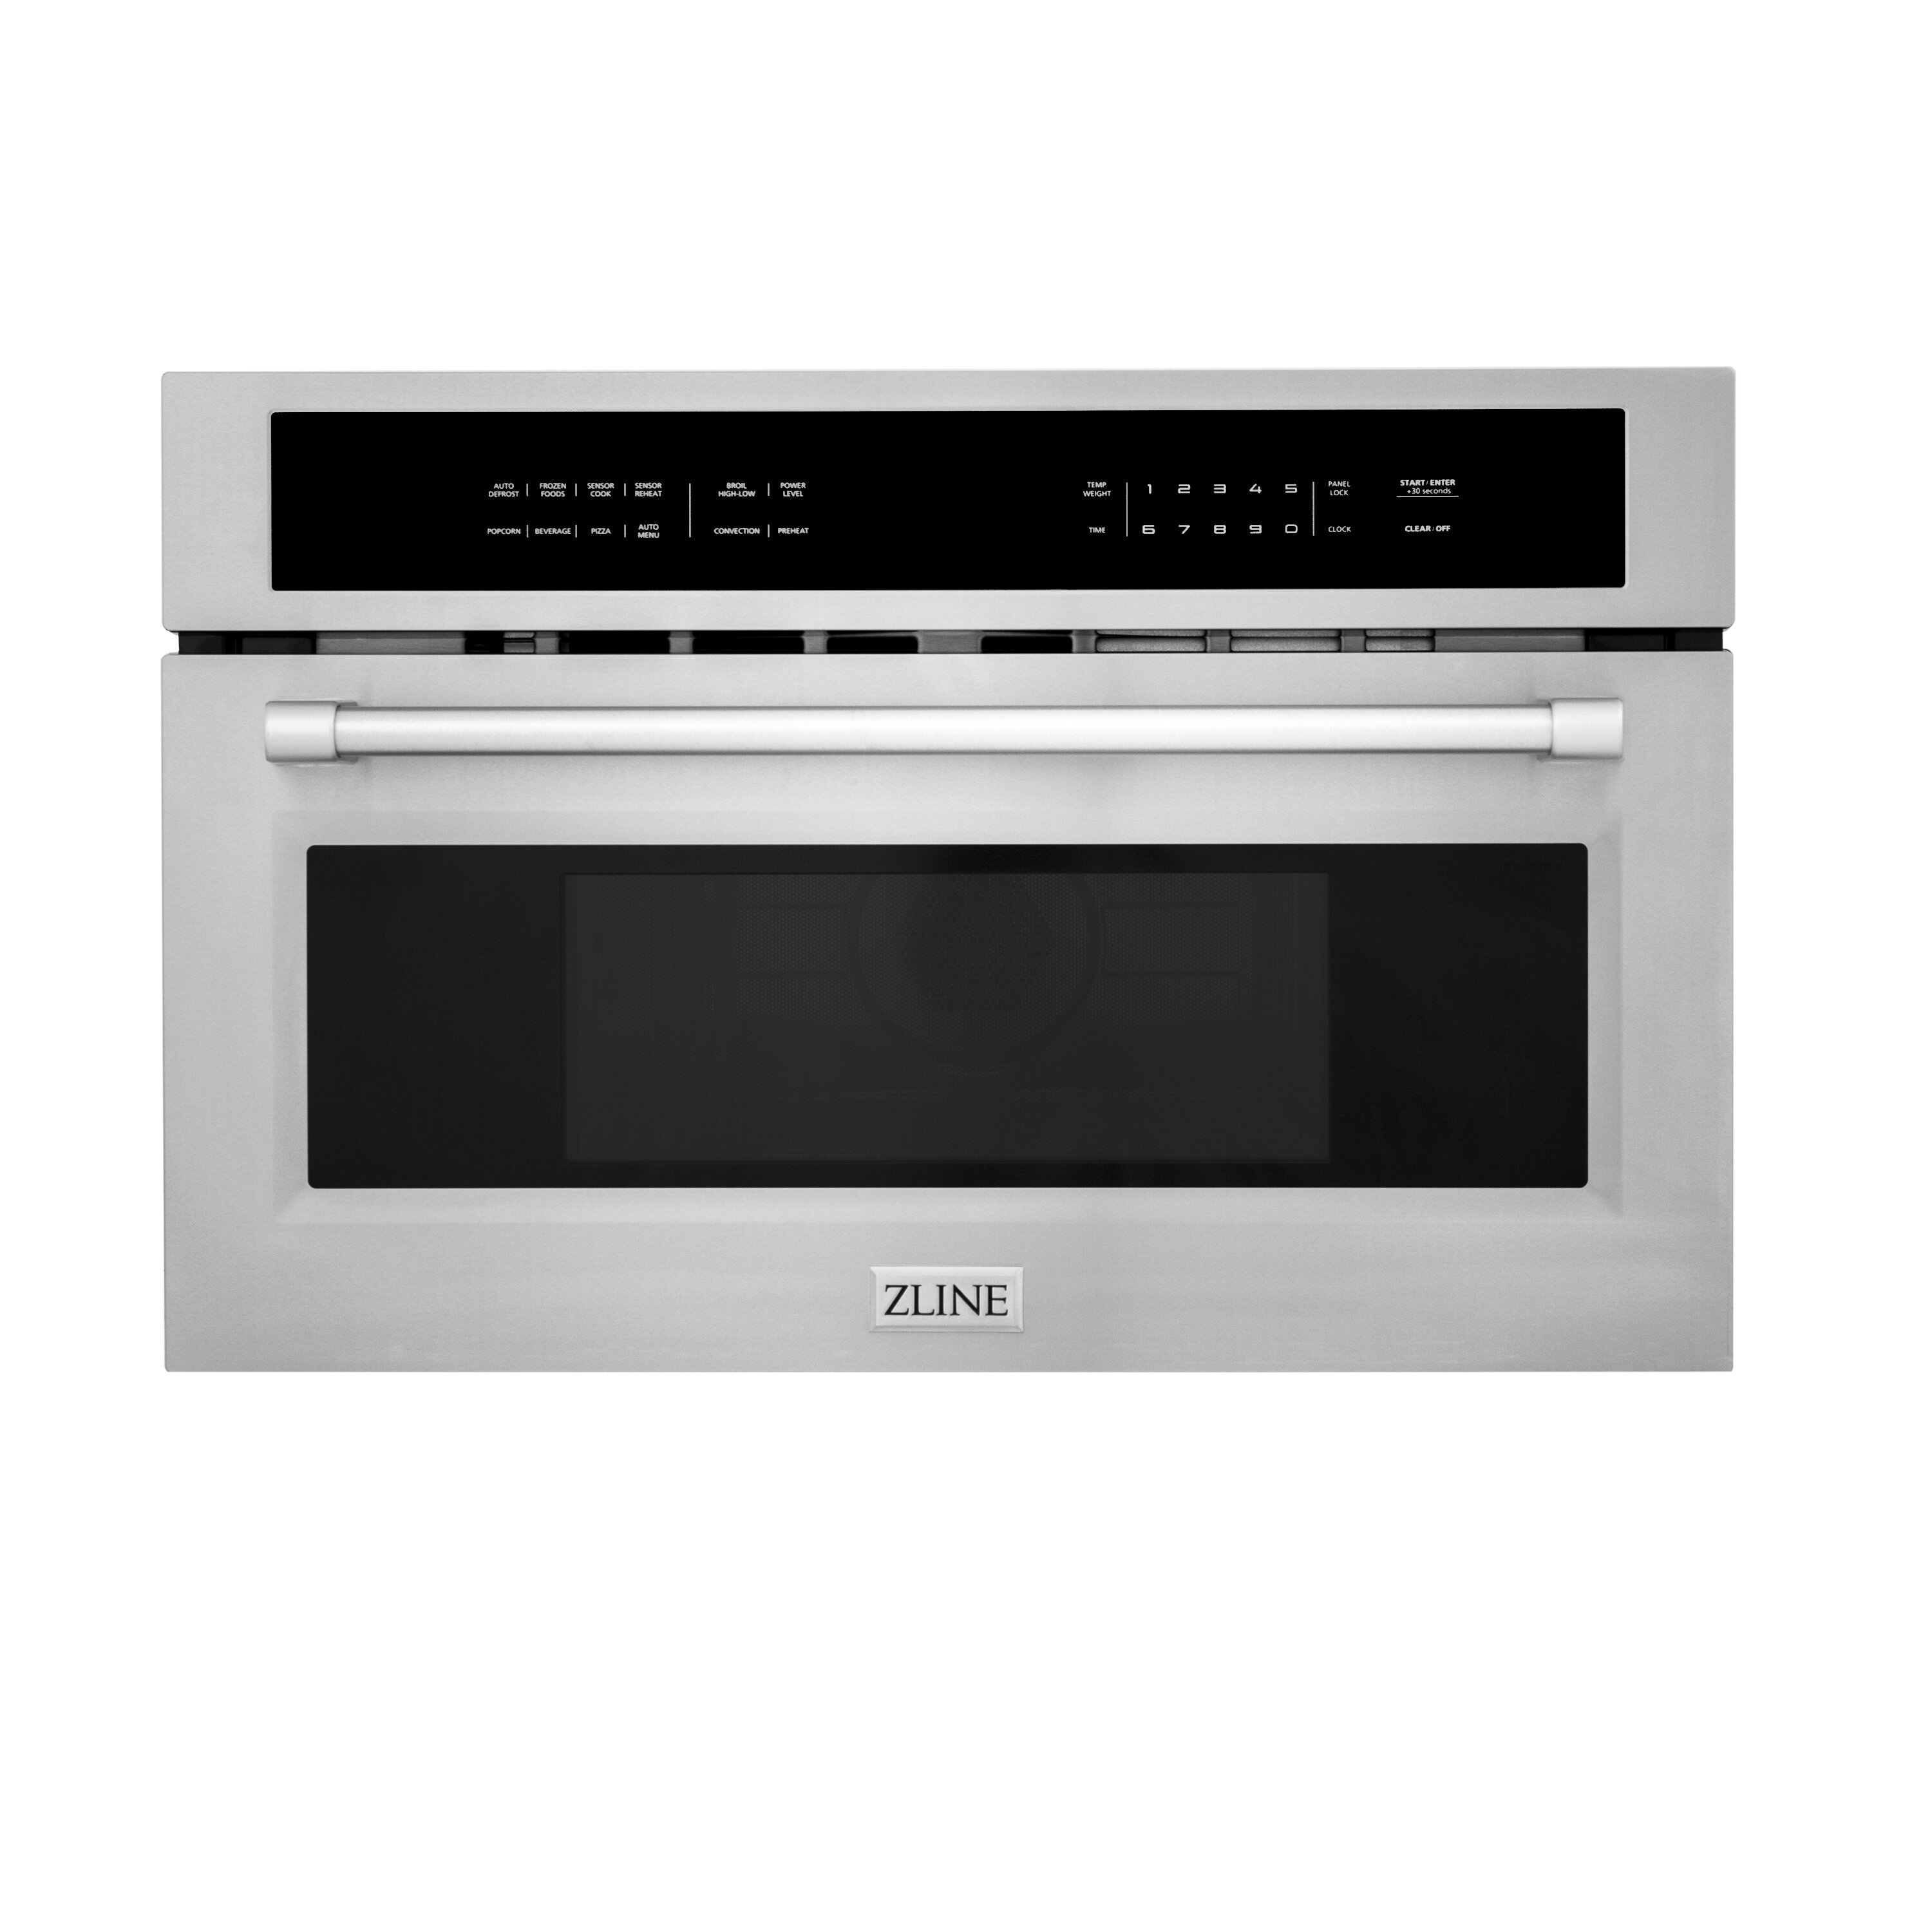 GE Profile 30'' Built-in Microwave Combination Oven - PWB7030SLSS